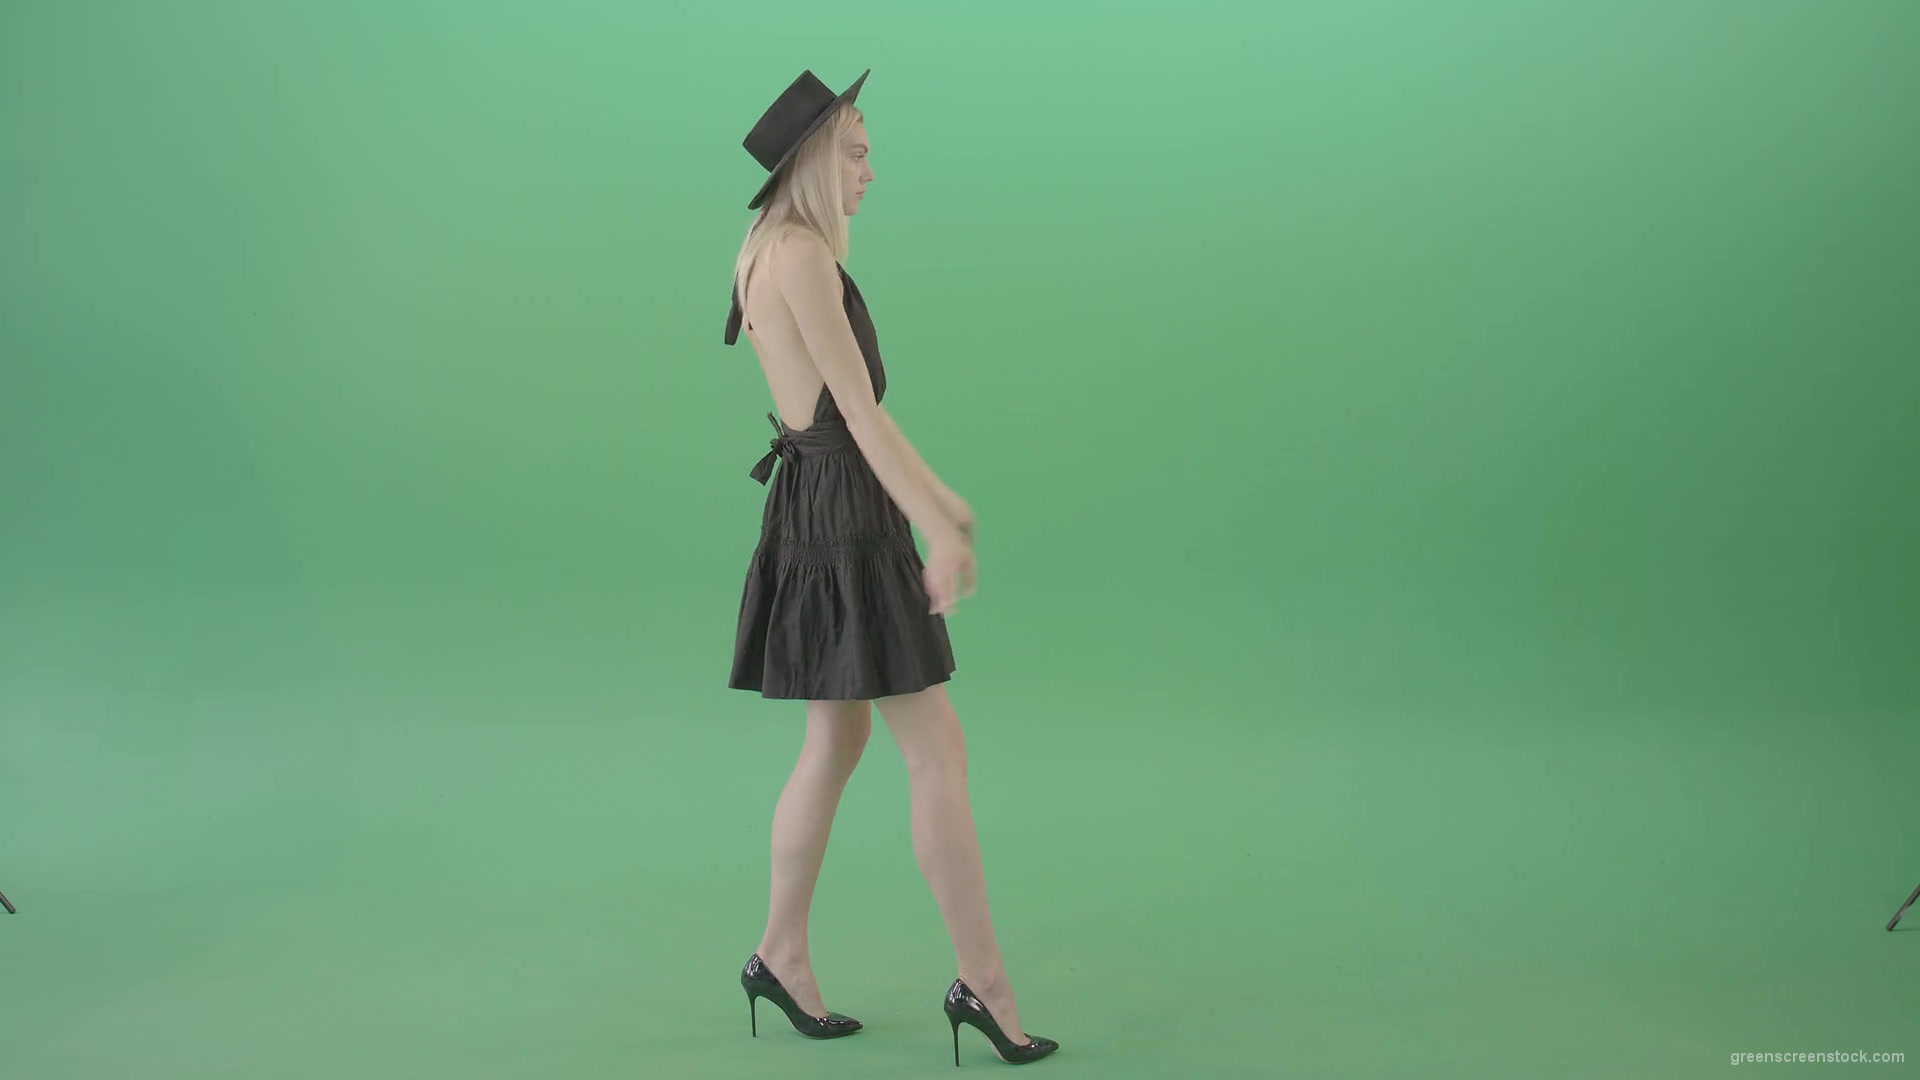 Sexy-blonde-girl-dancing-in-black-fashion-wear-dress-isolated-on-chromakey-Green-Screen-Video-Footage-1920_004 Green Screen Stock